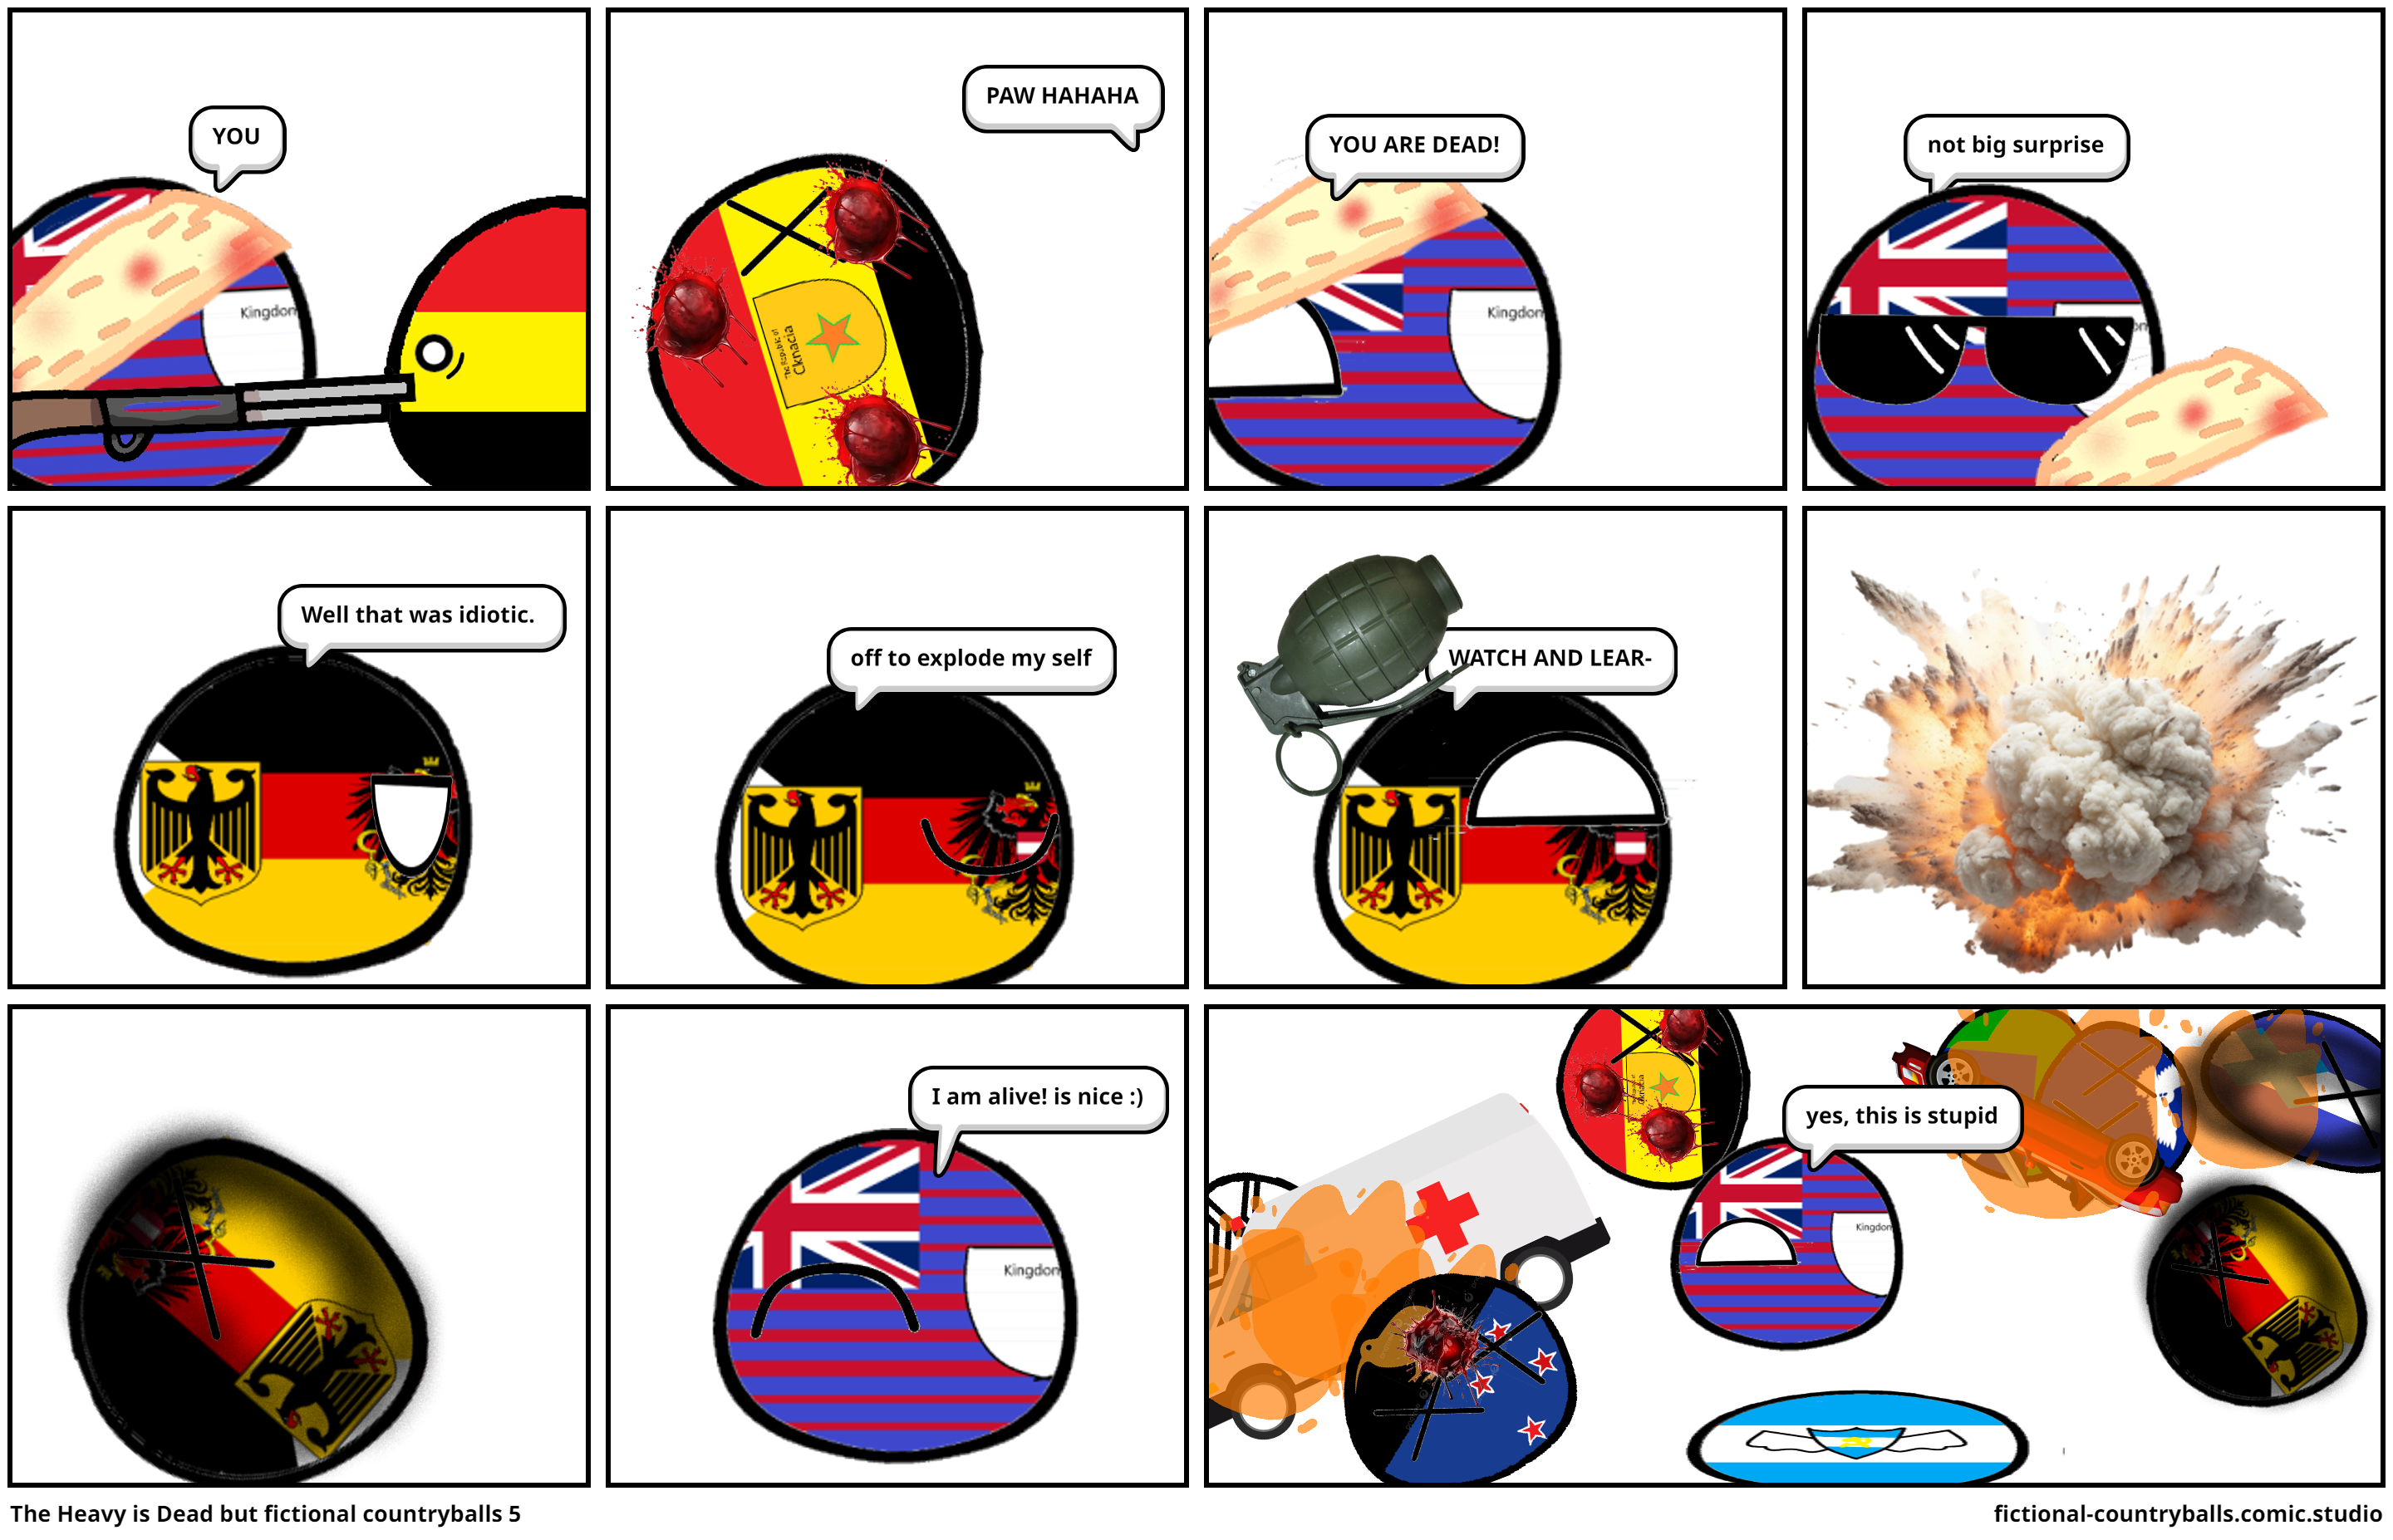 The Heavy is Dead but fictional countryballs 5